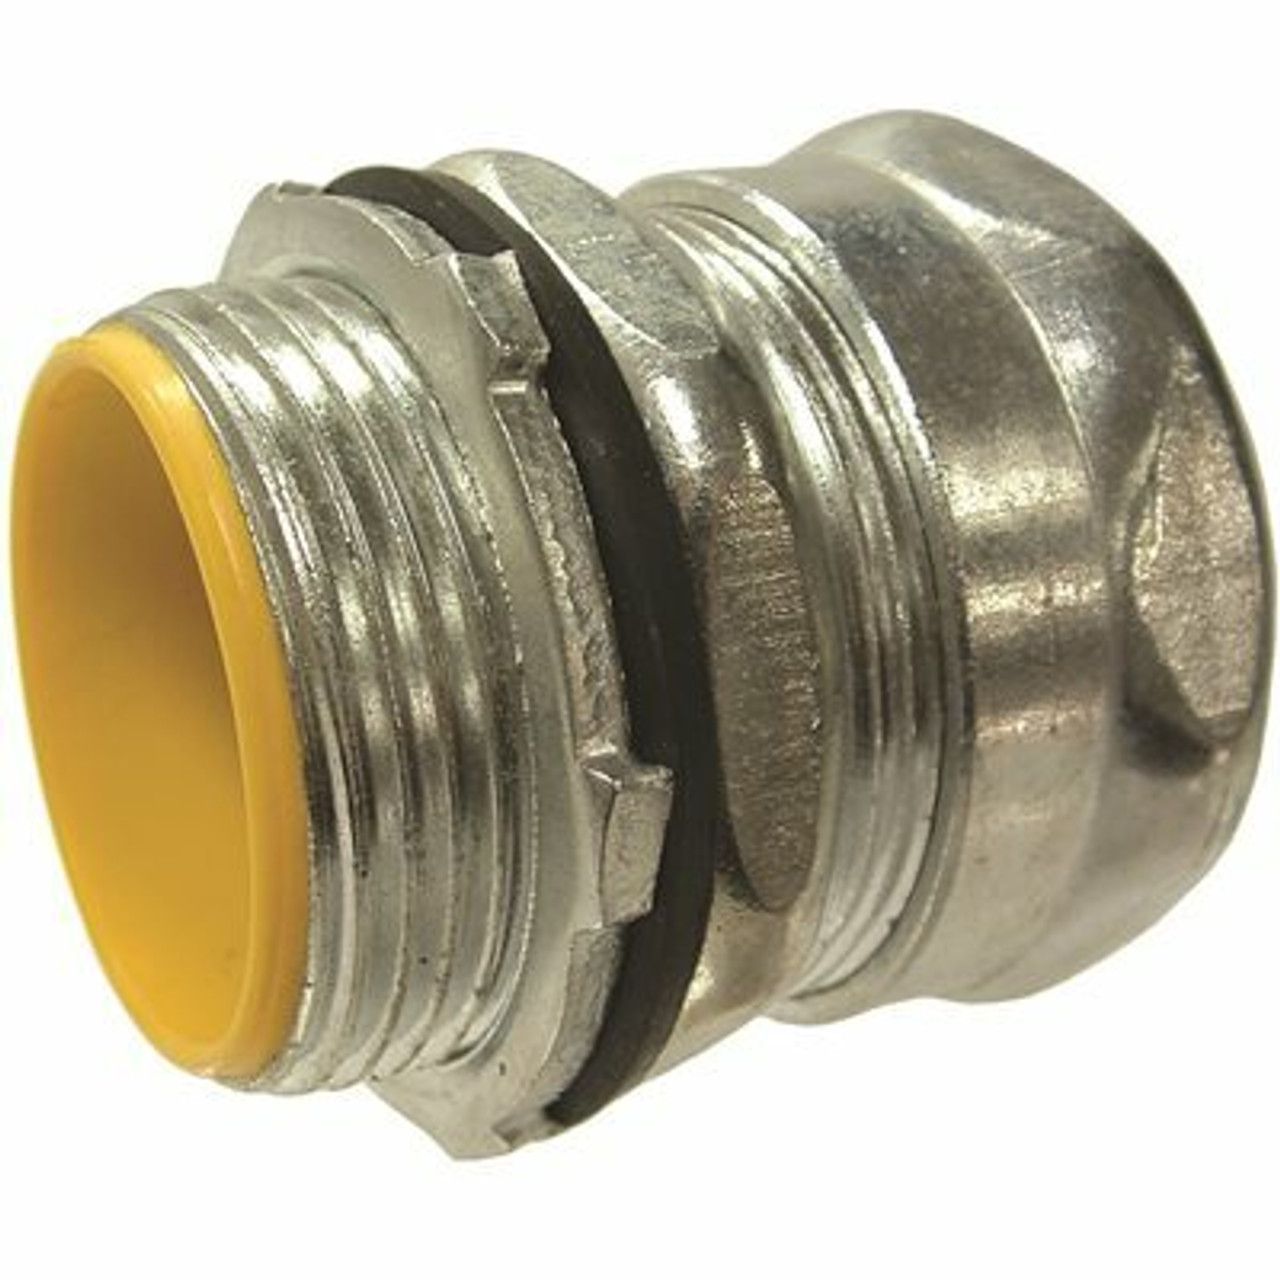 Hubbell Wiring Raco Raintight Steel Emt Insulated Compression Connector, 1/2 In. Trade Size